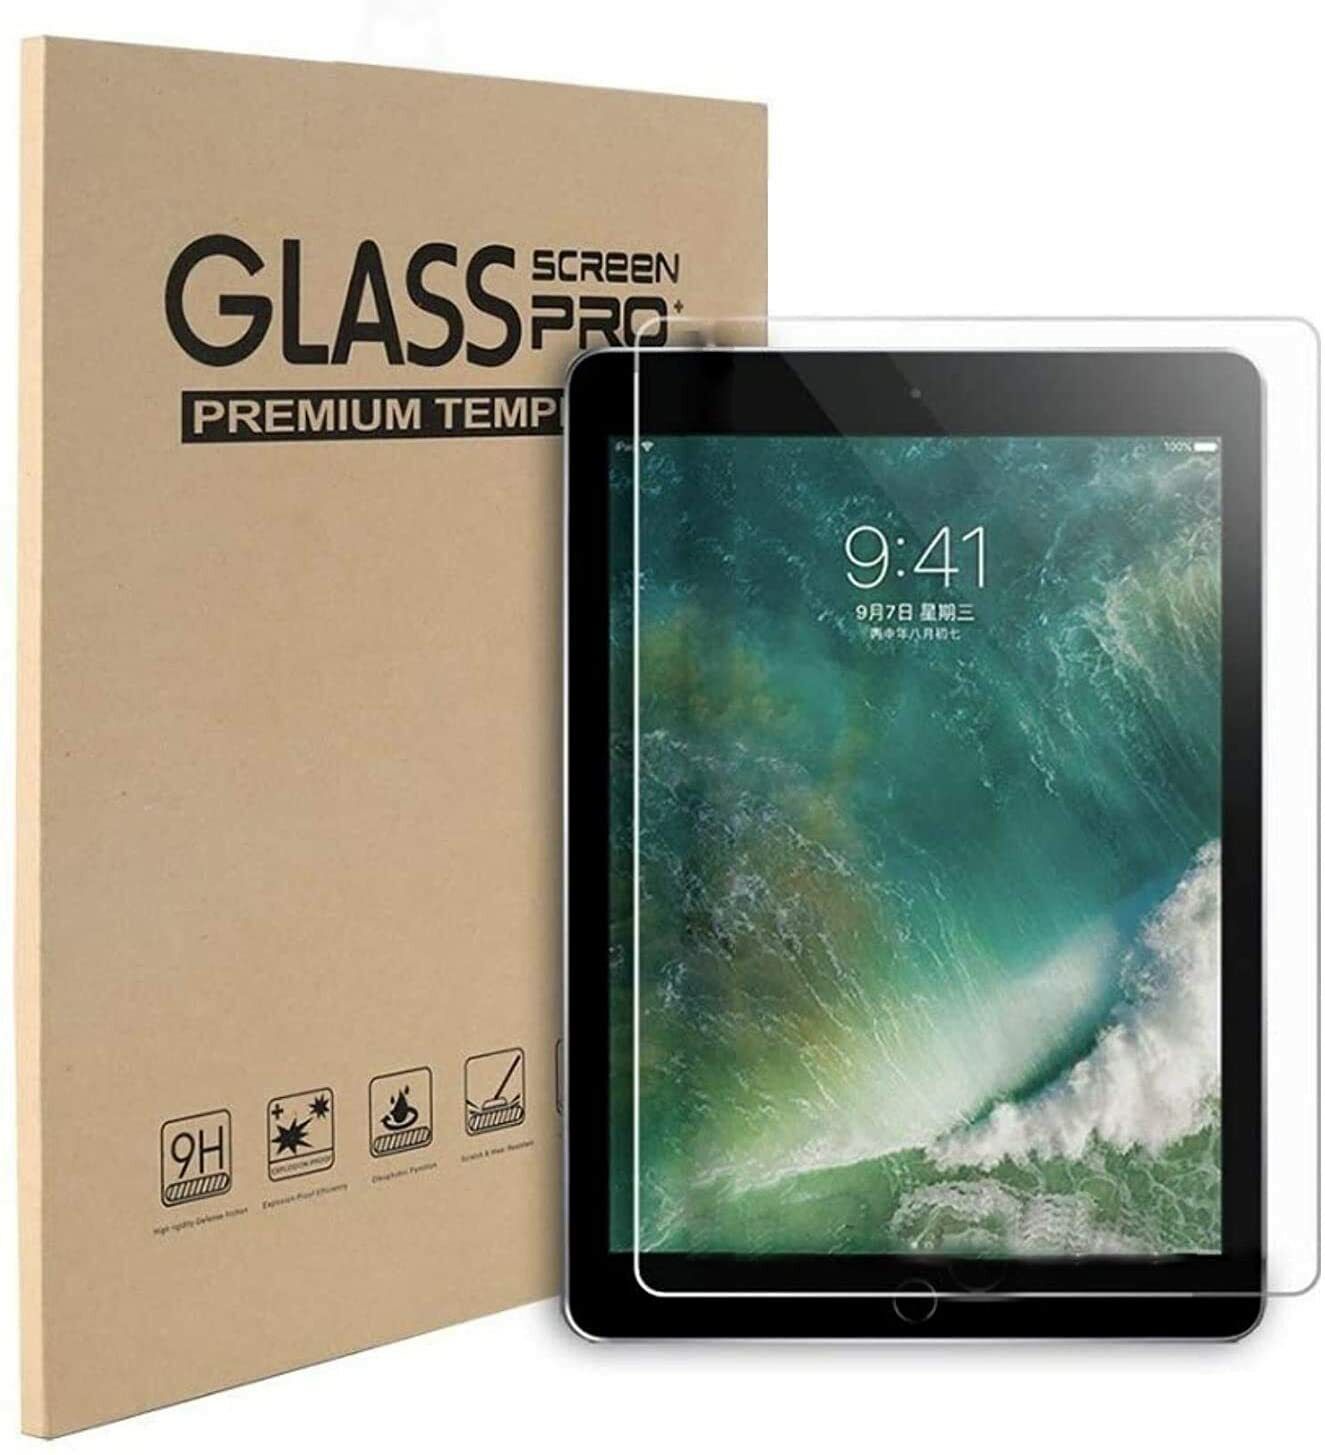 High Premium Tempered Clear Glass Screen Protector For Apple iPad Mini 2/3/4/5/6